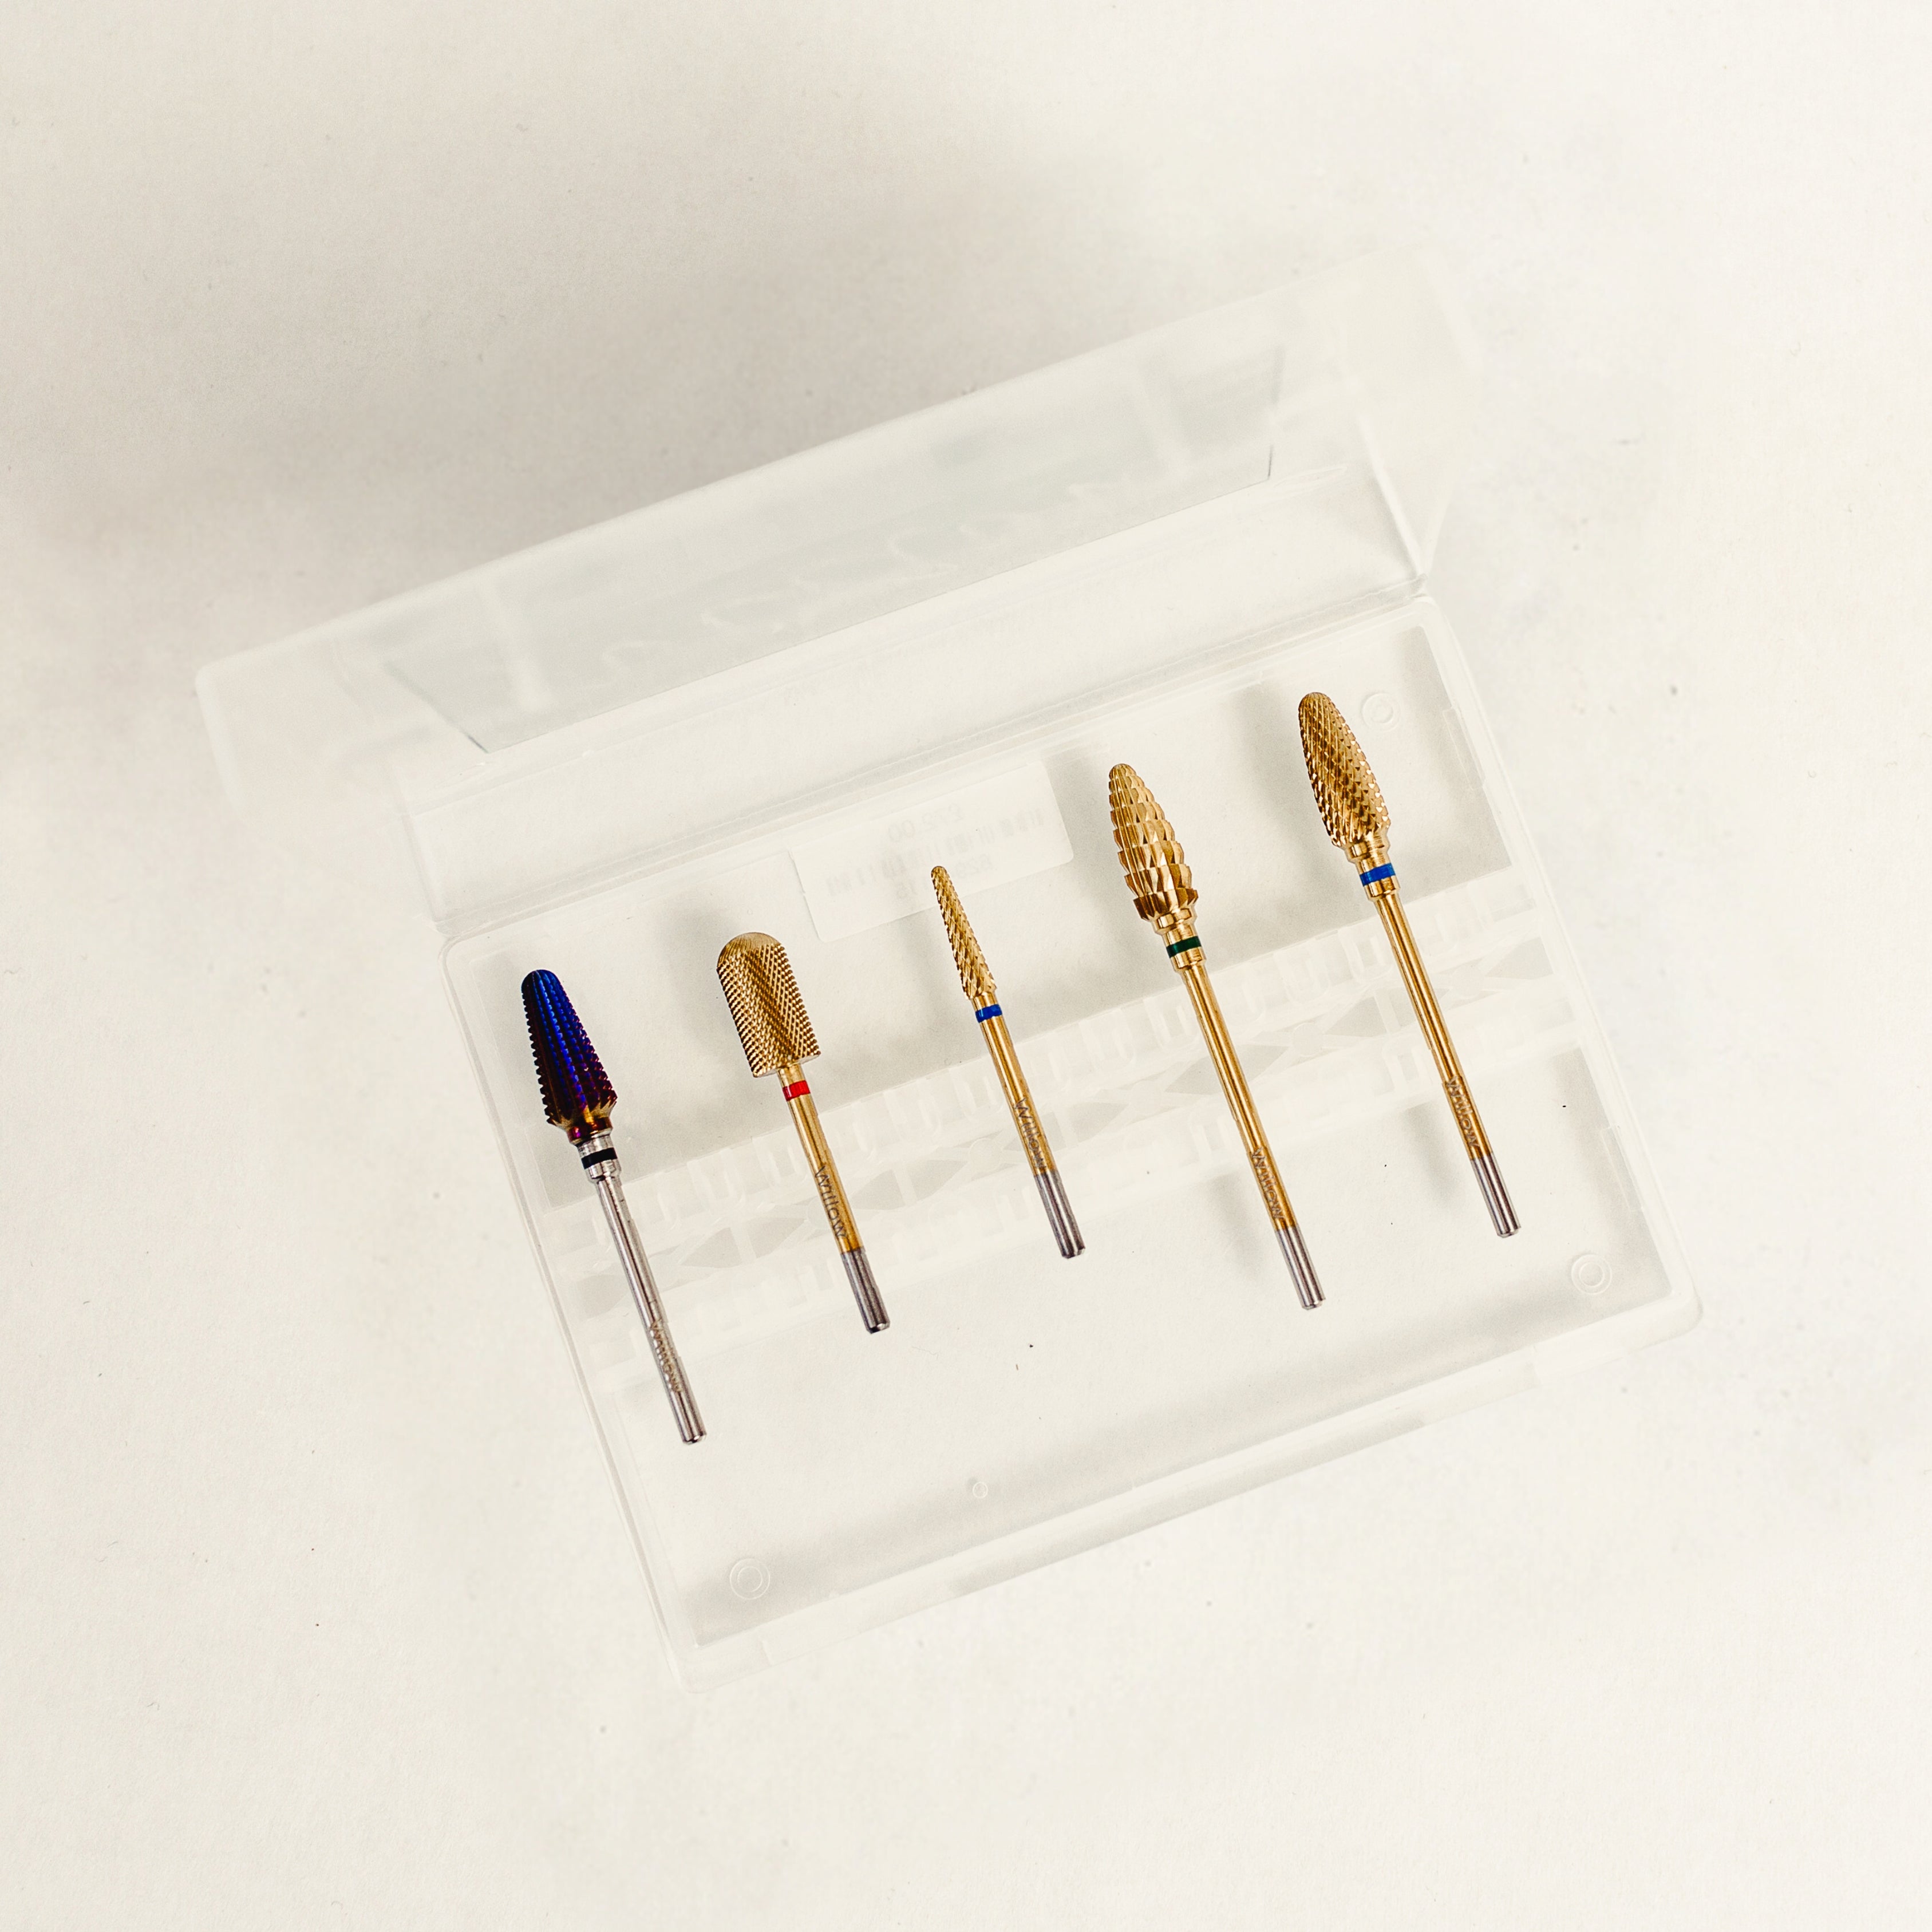 The Gold Carbide Kit